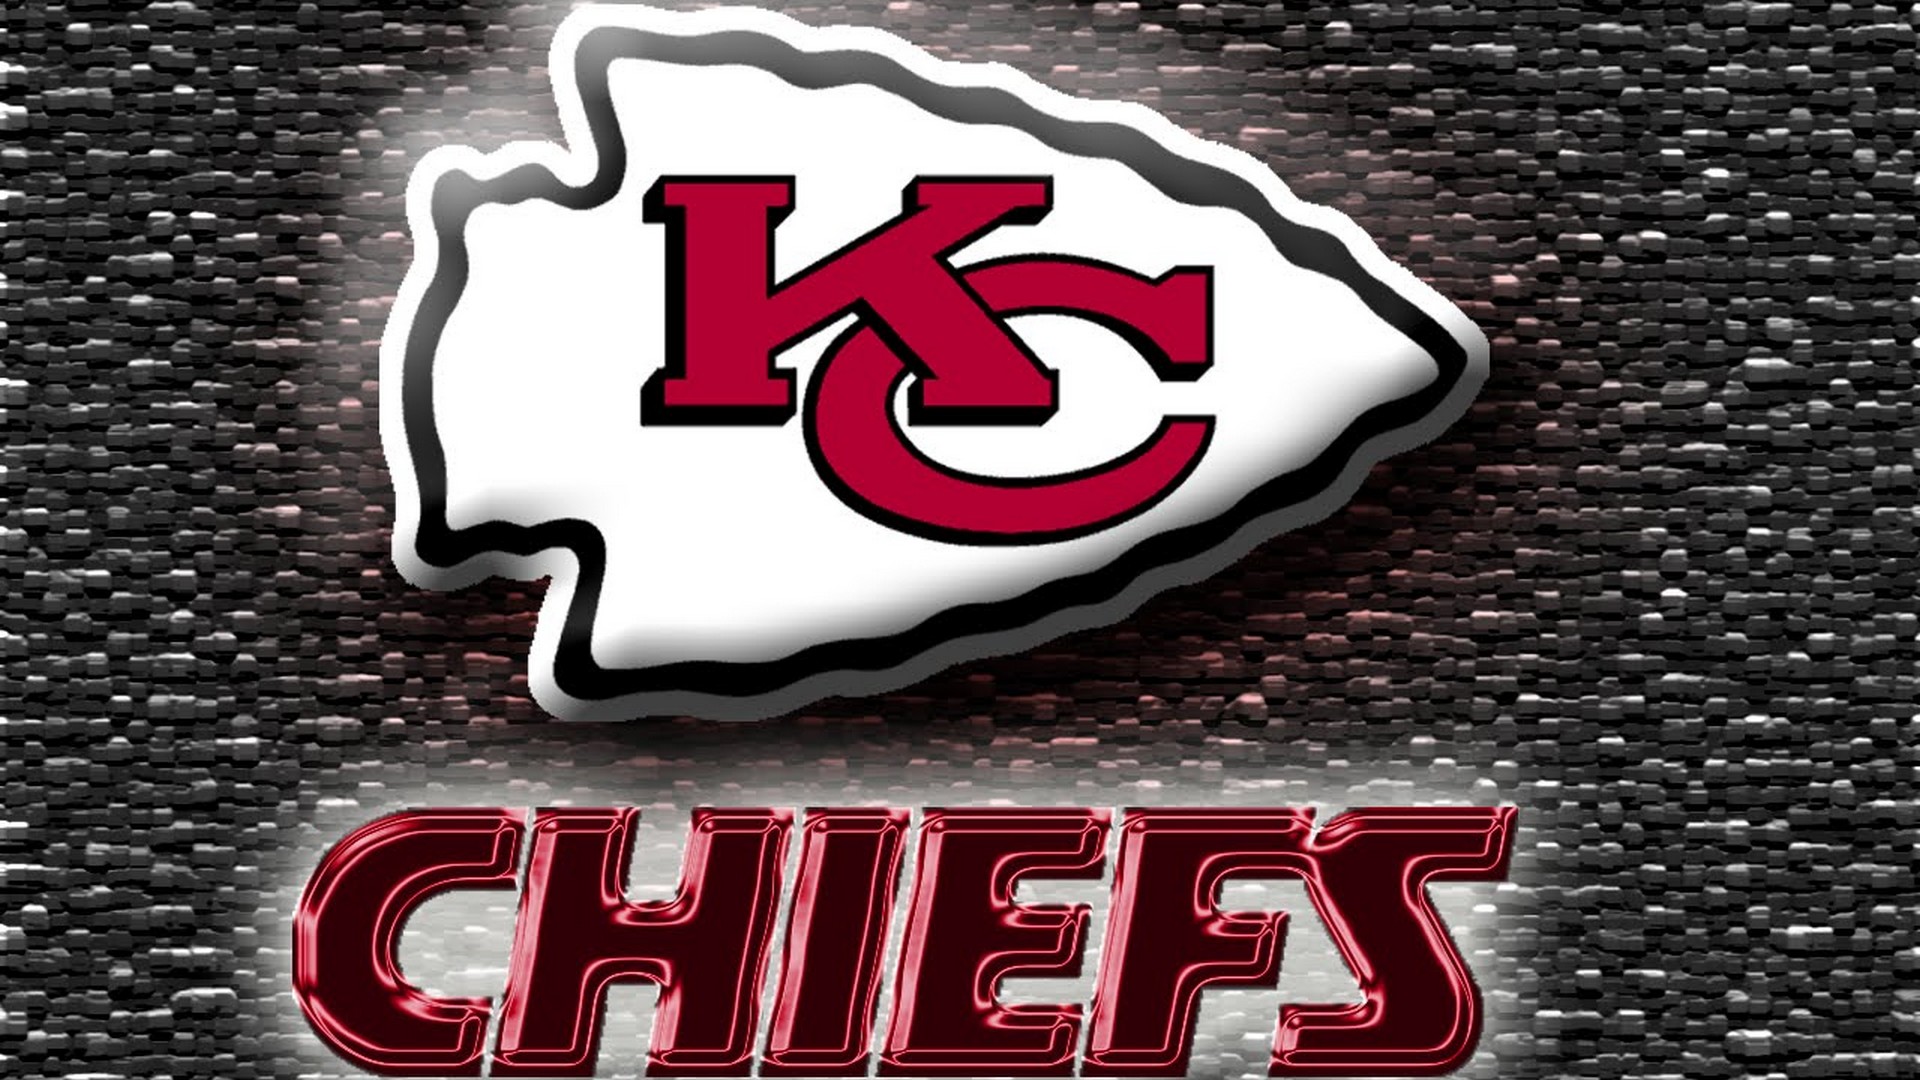 Kansas City Chiefs HD Wallpapers With Resolution 1920X1080 pixel. You can make this wallpaper for your Mac or Windows Desktop Background, iPhone, Android or Tablet and another Smartphone device for free